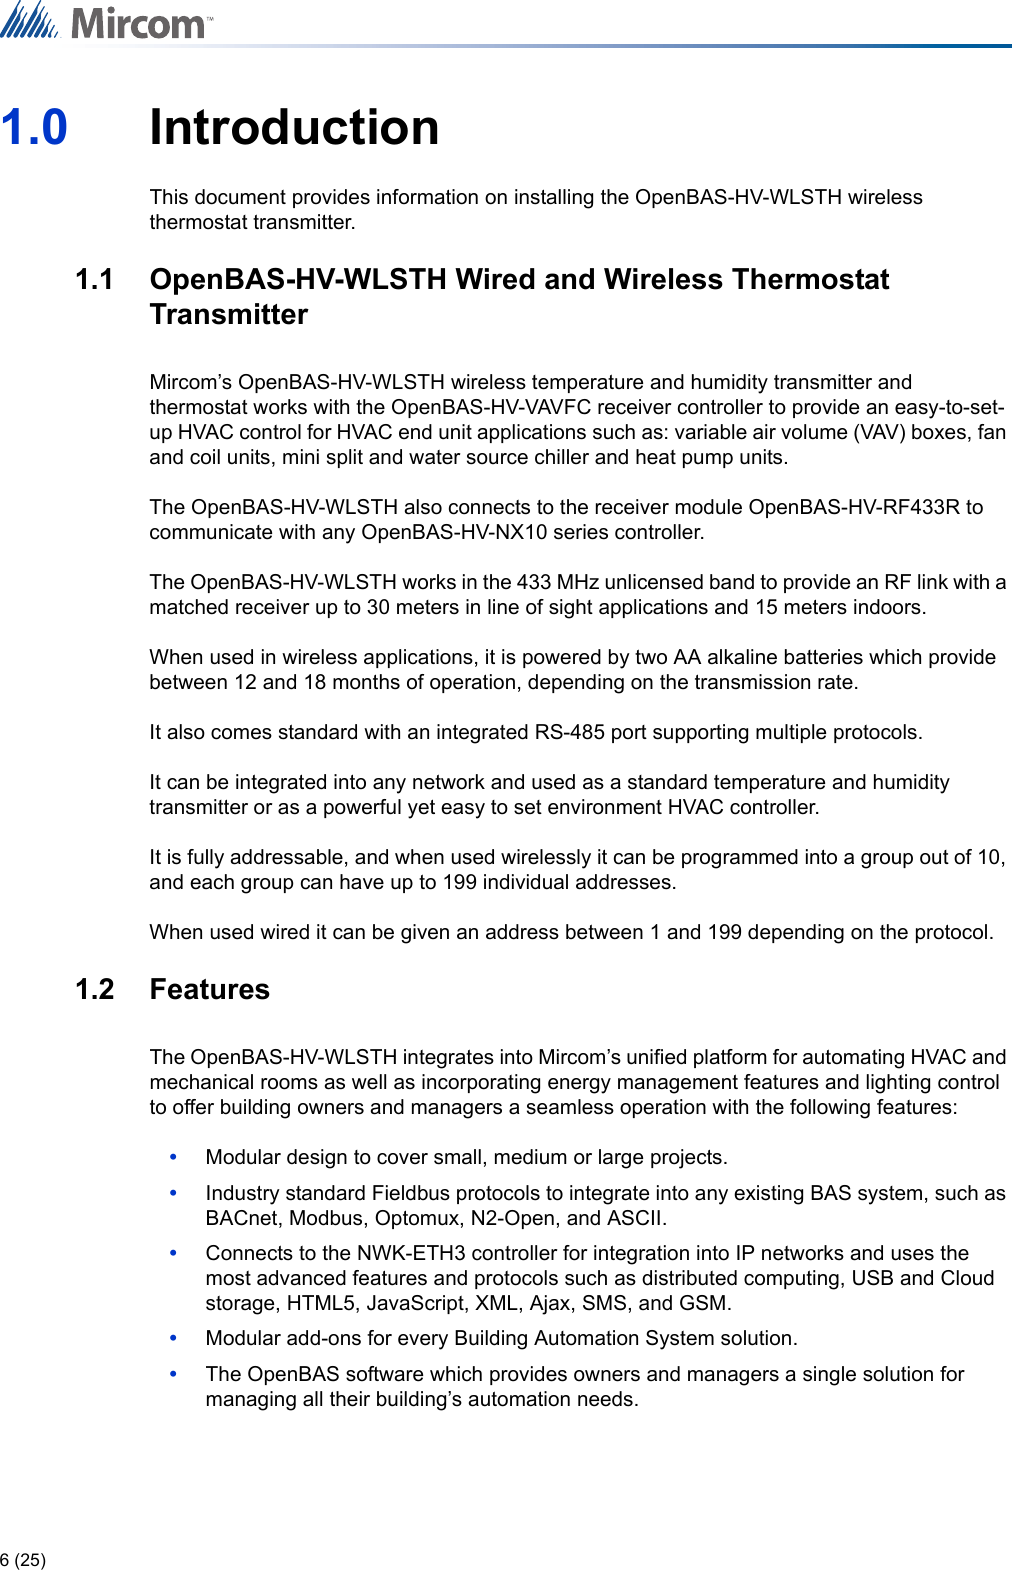 6 (25)1.0 IntroductionThis document provides information on installing the OpenBAS-HV-WLSTH wireless thermostat transmitter.1.1 OpenBAS-HV-WLSTH Wired and Wireless Thermostat TransmitterMircom’s OpenBAS-HV-WLSTH wireless temperature and humidity transmitter and thermostat works with the OpenBAS-HV-VAVFC receiver controller to provide an easy-to-set-up HVAC control for HVAC end unit applications such as: variable air volume (VAV) boxes, fan and coil units, mini split and water source chiller and heat pump units.The OpenBAS-HV-WLSTH also connects to the receiver module OpenBAS-HV-RF433R to communicate with any OpenBAS-HV-NX10 series controller.The OpenBAS-HV-WLSTH works in the 433 MHz unlicensed band to provide an RF link with a matched receiver up to 30 meters in line of sight applications and 15 meters indoors.When used in wireless applications, it is powered by two AA alkaline batteries which provide between 12 and 18 months of operation, depending on the transmission rate.It also comes standard with an integrated RS-485 port supporting multiple protocols. It can be integrated into any network and used as a standard temperature and humidity transmitter or as a powerful yet easy to set environment HVAC controller.It is fully addressable, and when used wirelessly it can be programmed into a group out of 10, and each group can have up to 199 individual addresses.When used wired it can be given an address between 1 and 199 depending on the protocol.1.2 FeaturesThe OpenBAS-HV-WLSTH integrates into Mircom’s unified platform for automating HVAC and mechanical rooms as well as incorporating energy management features and lighting control to offer building owners and managers a seamless operation with the following features:•Modular design to cover small, medium or large projects.•Industry standard Fieldbus protocols to integrate into any existing BAS system, such as BACnet, Modbus, Optomux, N2-Open, and ASCII.•Connects to the NWK-ETH3 controller for integration into IP networks and uses the most advanced features and protocols such as distributed computing, USB and Cloud storage, HTML5, JavaScript, XML, Ajax, SMS, and GSM.•Modular add-ons for every Building Automation System solution.•The OpenBAS software which provides owners and managers a single solution for managing all their building’s automation needs.